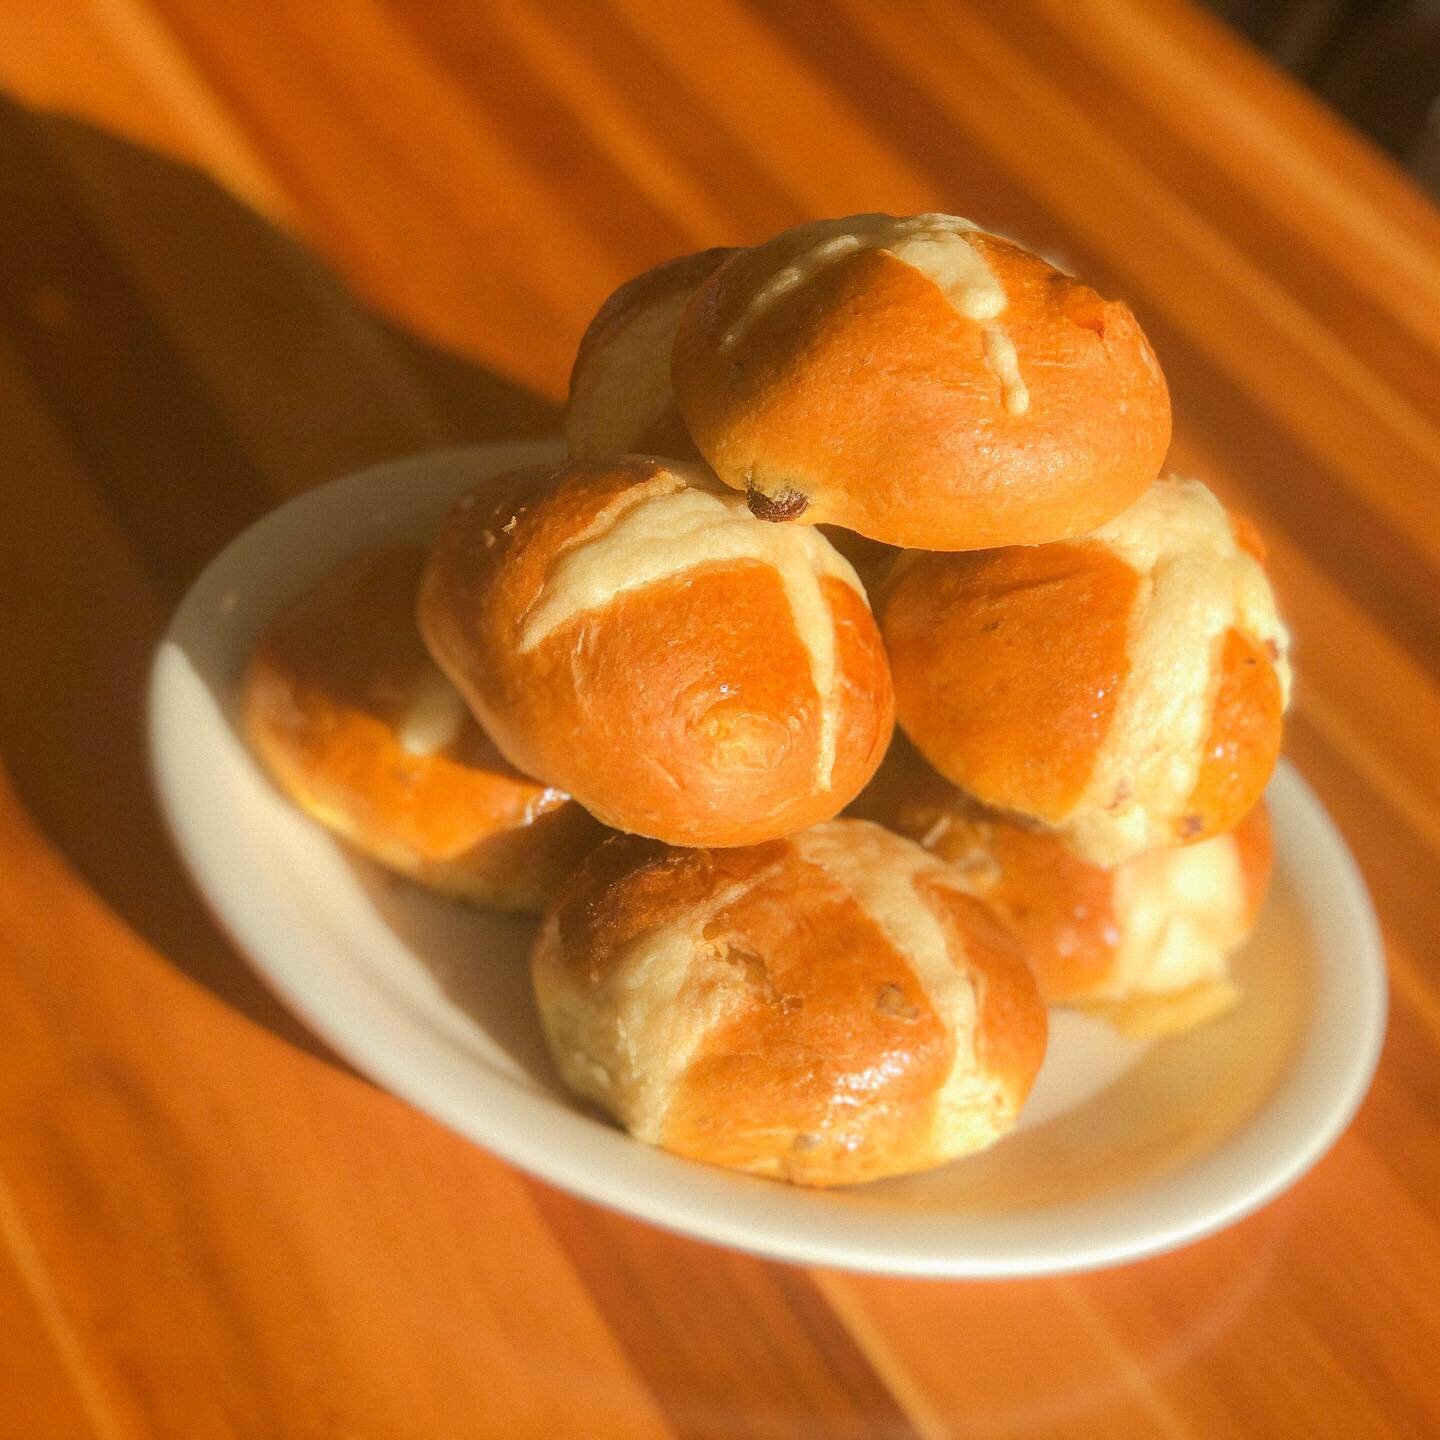 Come try our seasonal bread, the Hot Cross Bun! They are delicious brioche like breading with cinnamon, nutmeg, and raisins. Excellent for Easter Sunday 🐰🐣
.
.
.
.
.
#easterbread #easterpastry #hotcrossbuns #buns #bread #bakery #bakeryandcafe #cafe